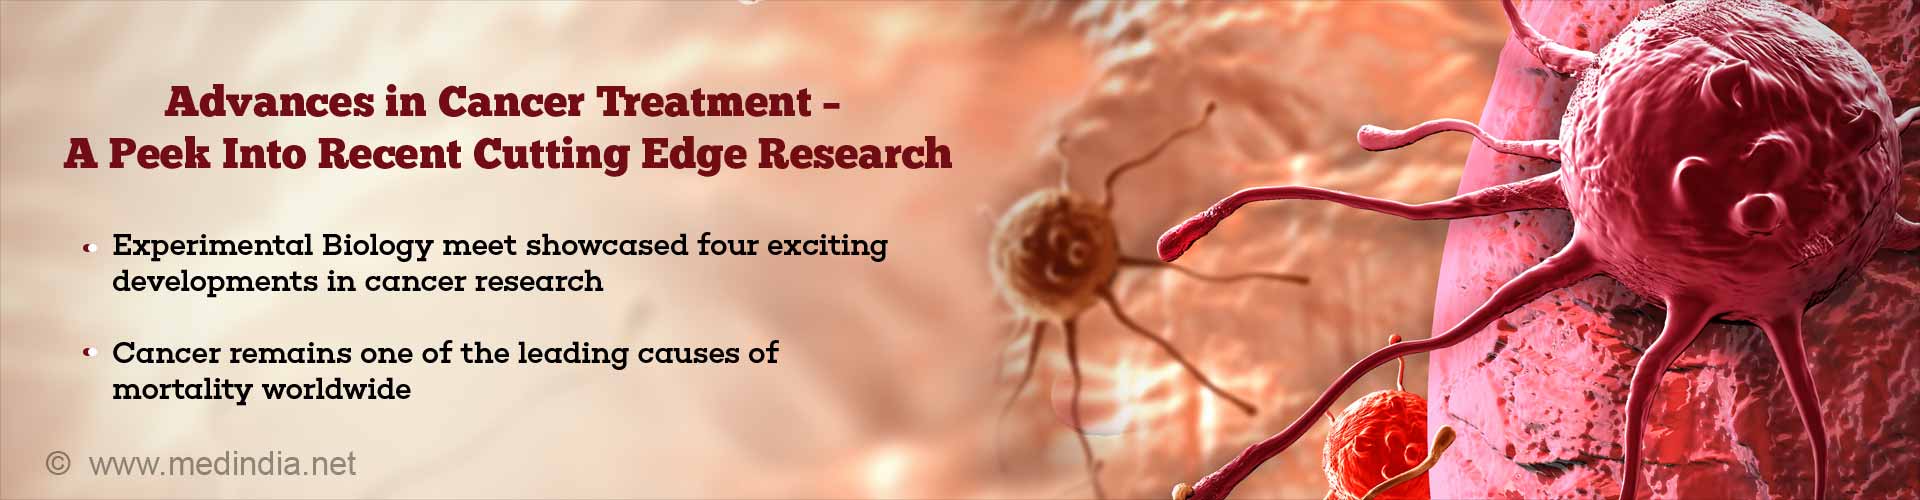 advances in cancer treatment - a peek into recent cutting edge research
- experimental biology meet showcased four exciting developments in cancer research
- cancer remains one of the leading causes of mortality worldwide